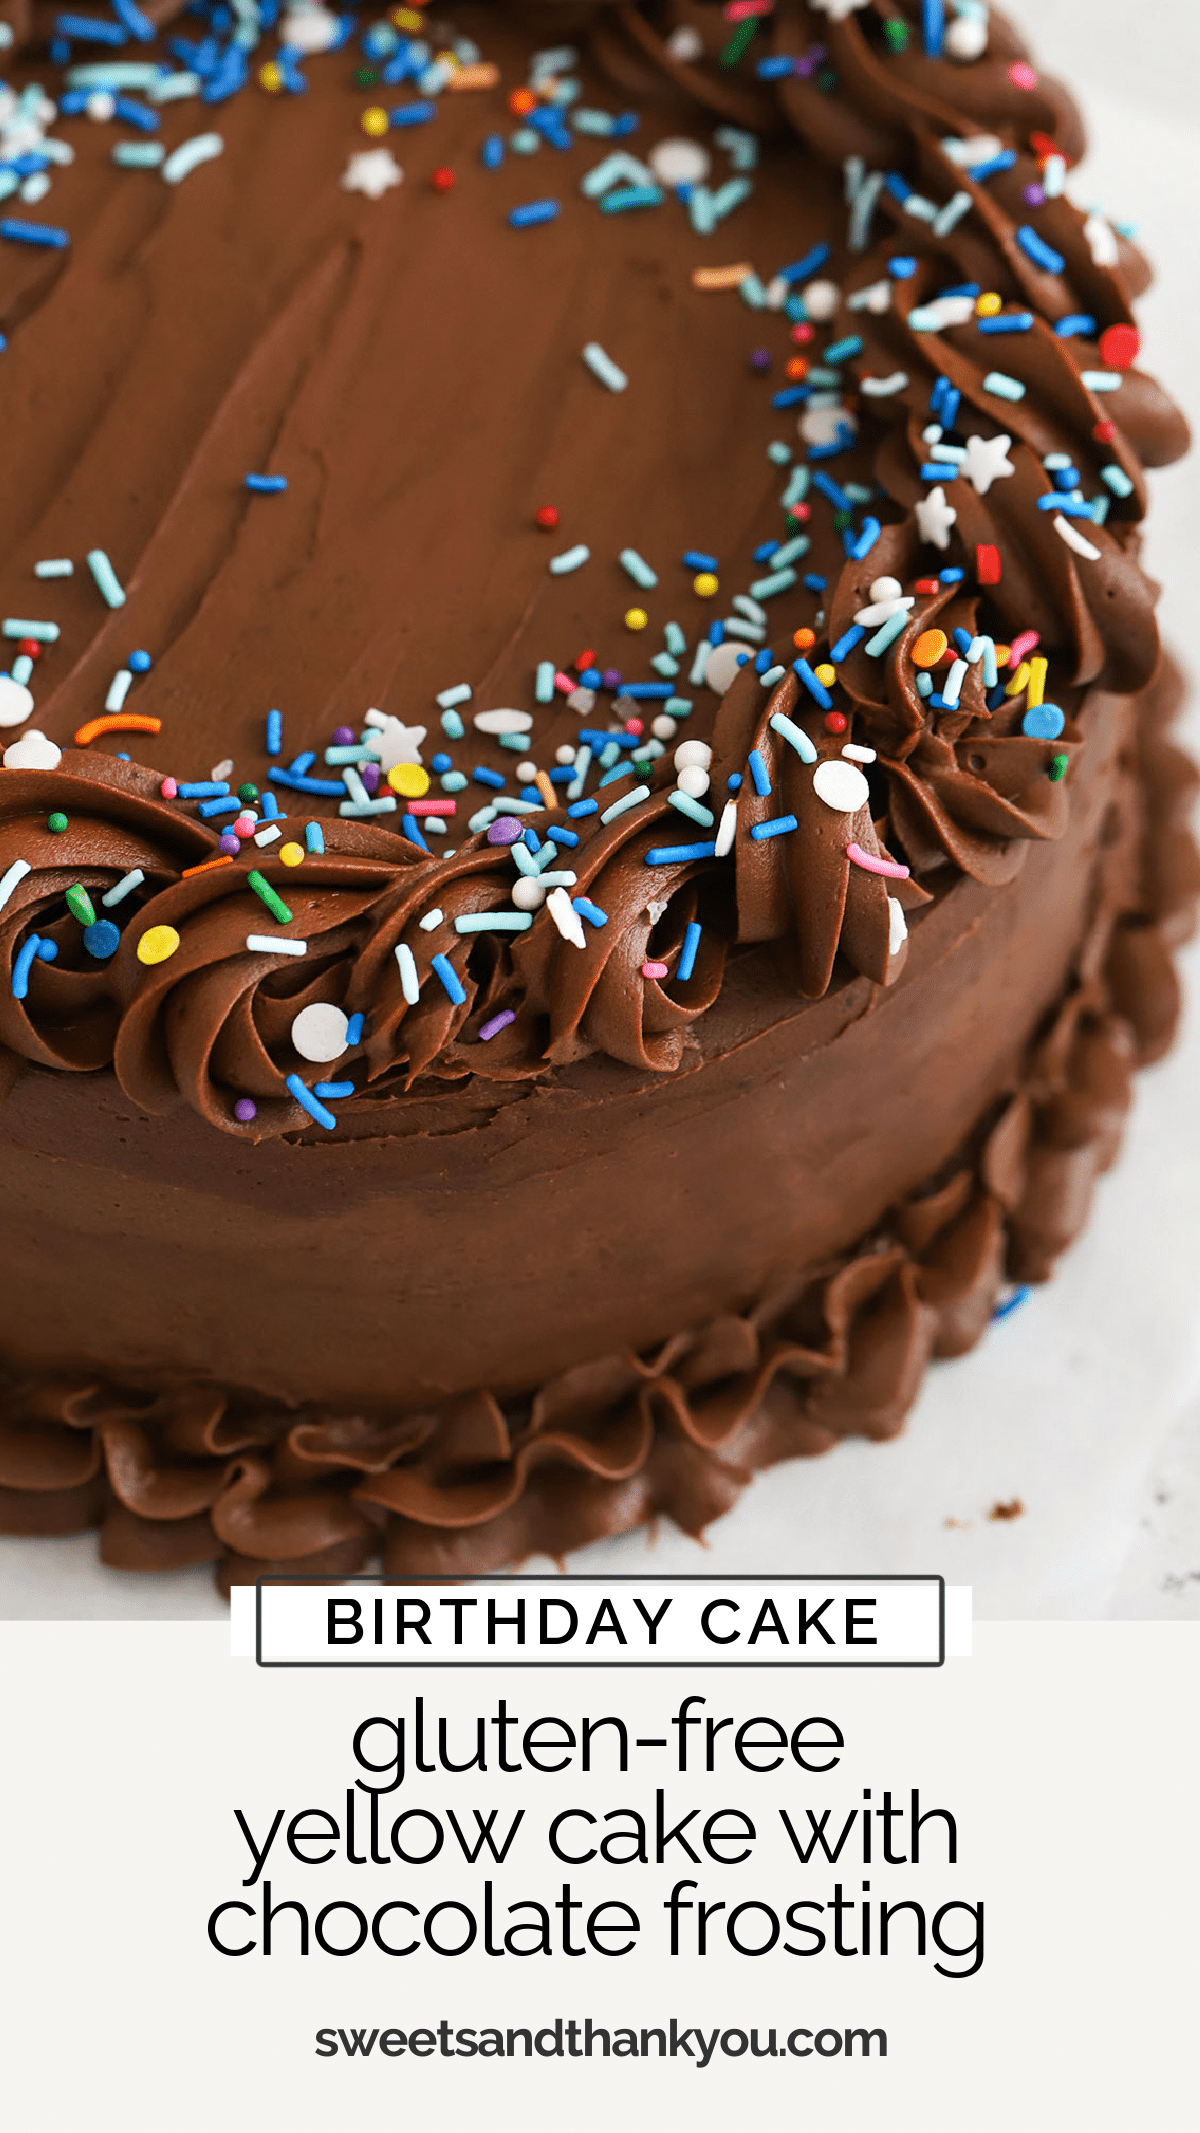 This gluten-free yellow cake recipe is the perfect cake for a birthday party or special occasion! Layers of fluffy vanilla cake and plush chocolate frosting make this gluten-free birthday cake a classic. / best gluten-free birthday cake recipe / easy gluten-free birthday cake recipe / gluten-free layer cake / gluten-free yellow layer cake with chocolate frosting / gluten free birthday cake with chocolate frosting / gluten-free birthday cake from scratch / 